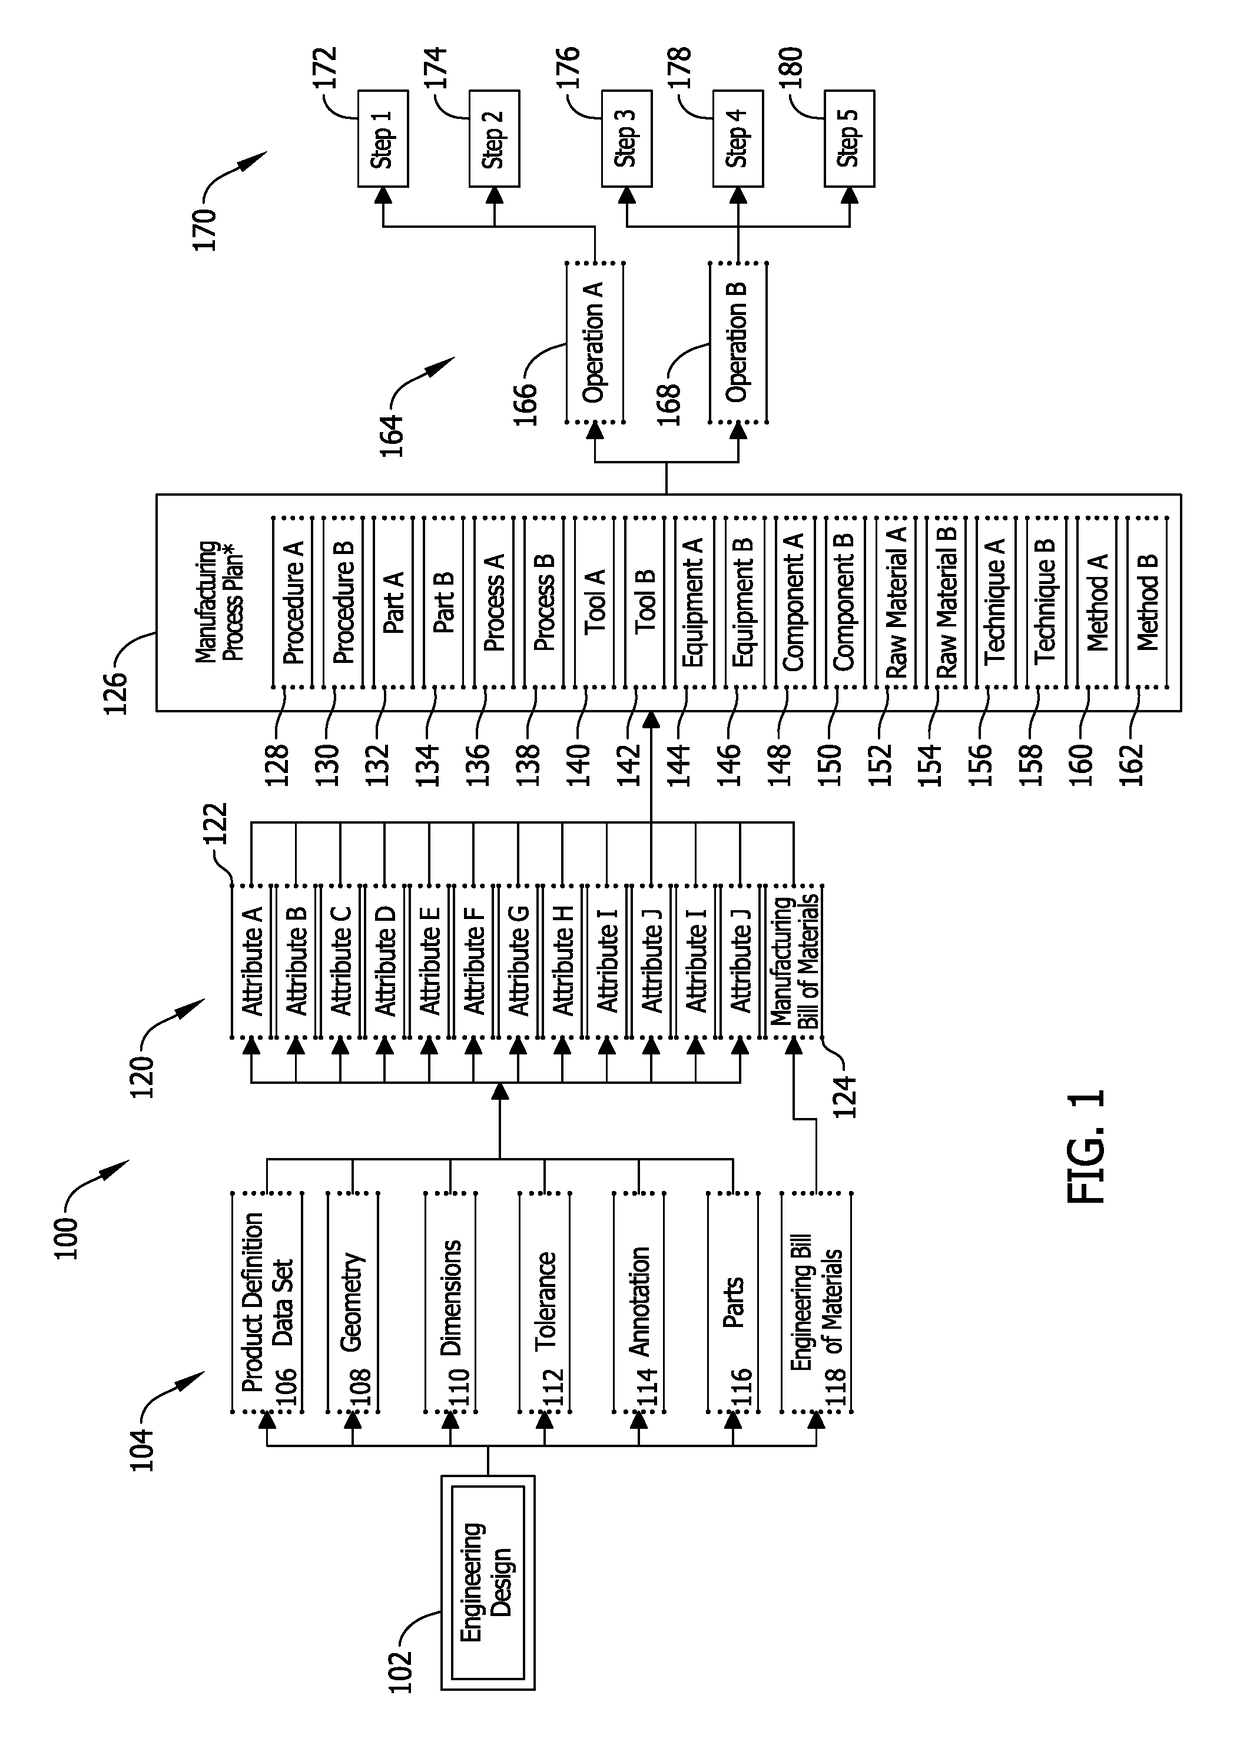 System and methods for managing changes to a product in a manufacturing environment including a bill of material pre-processor